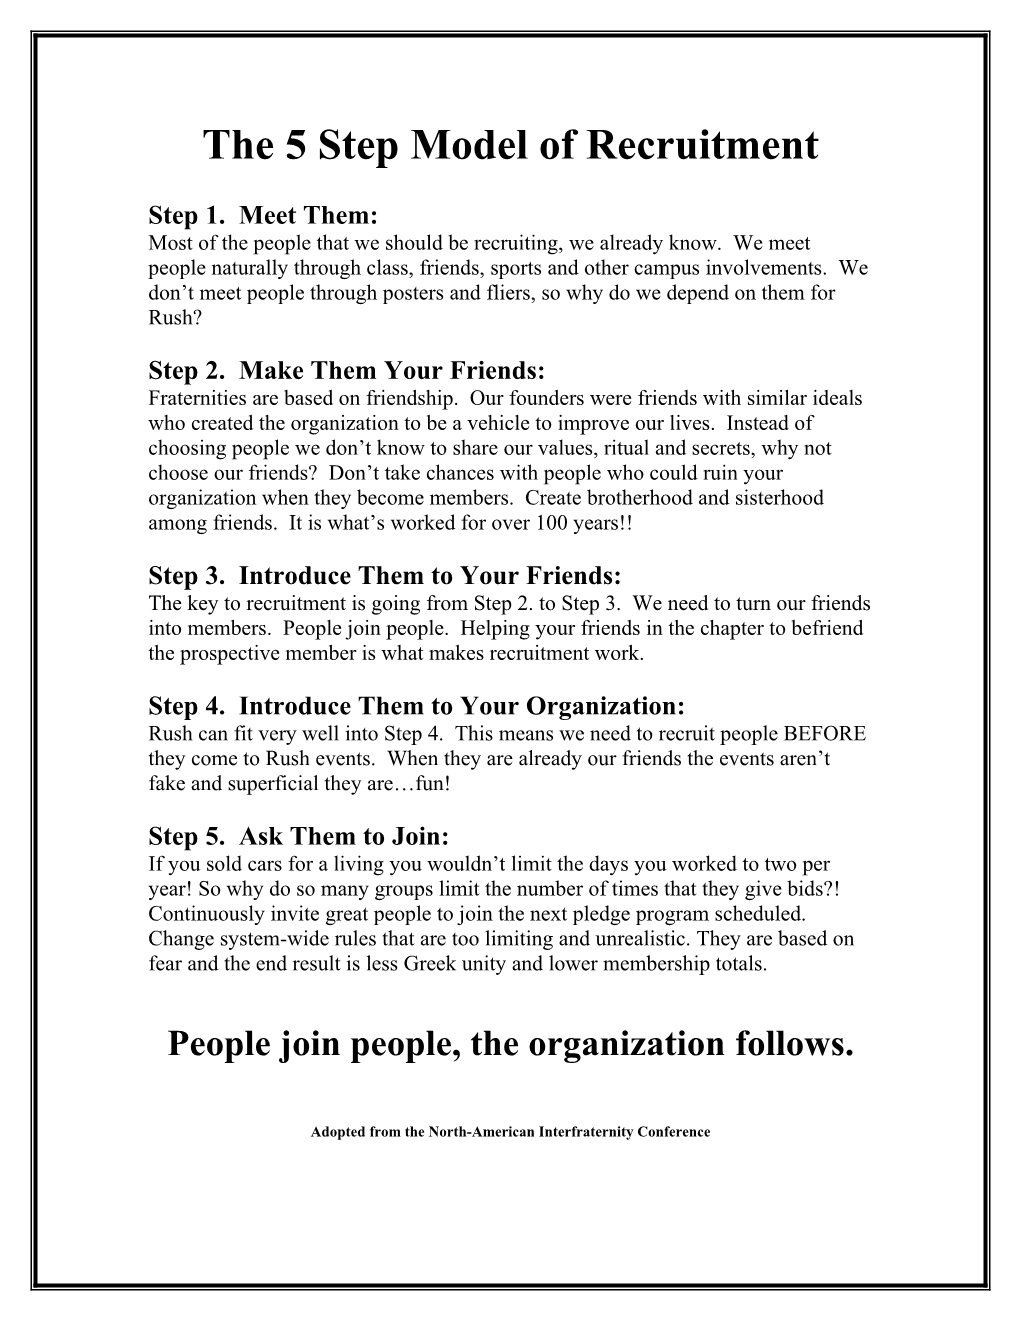 The 5 Step Model of Recruitment